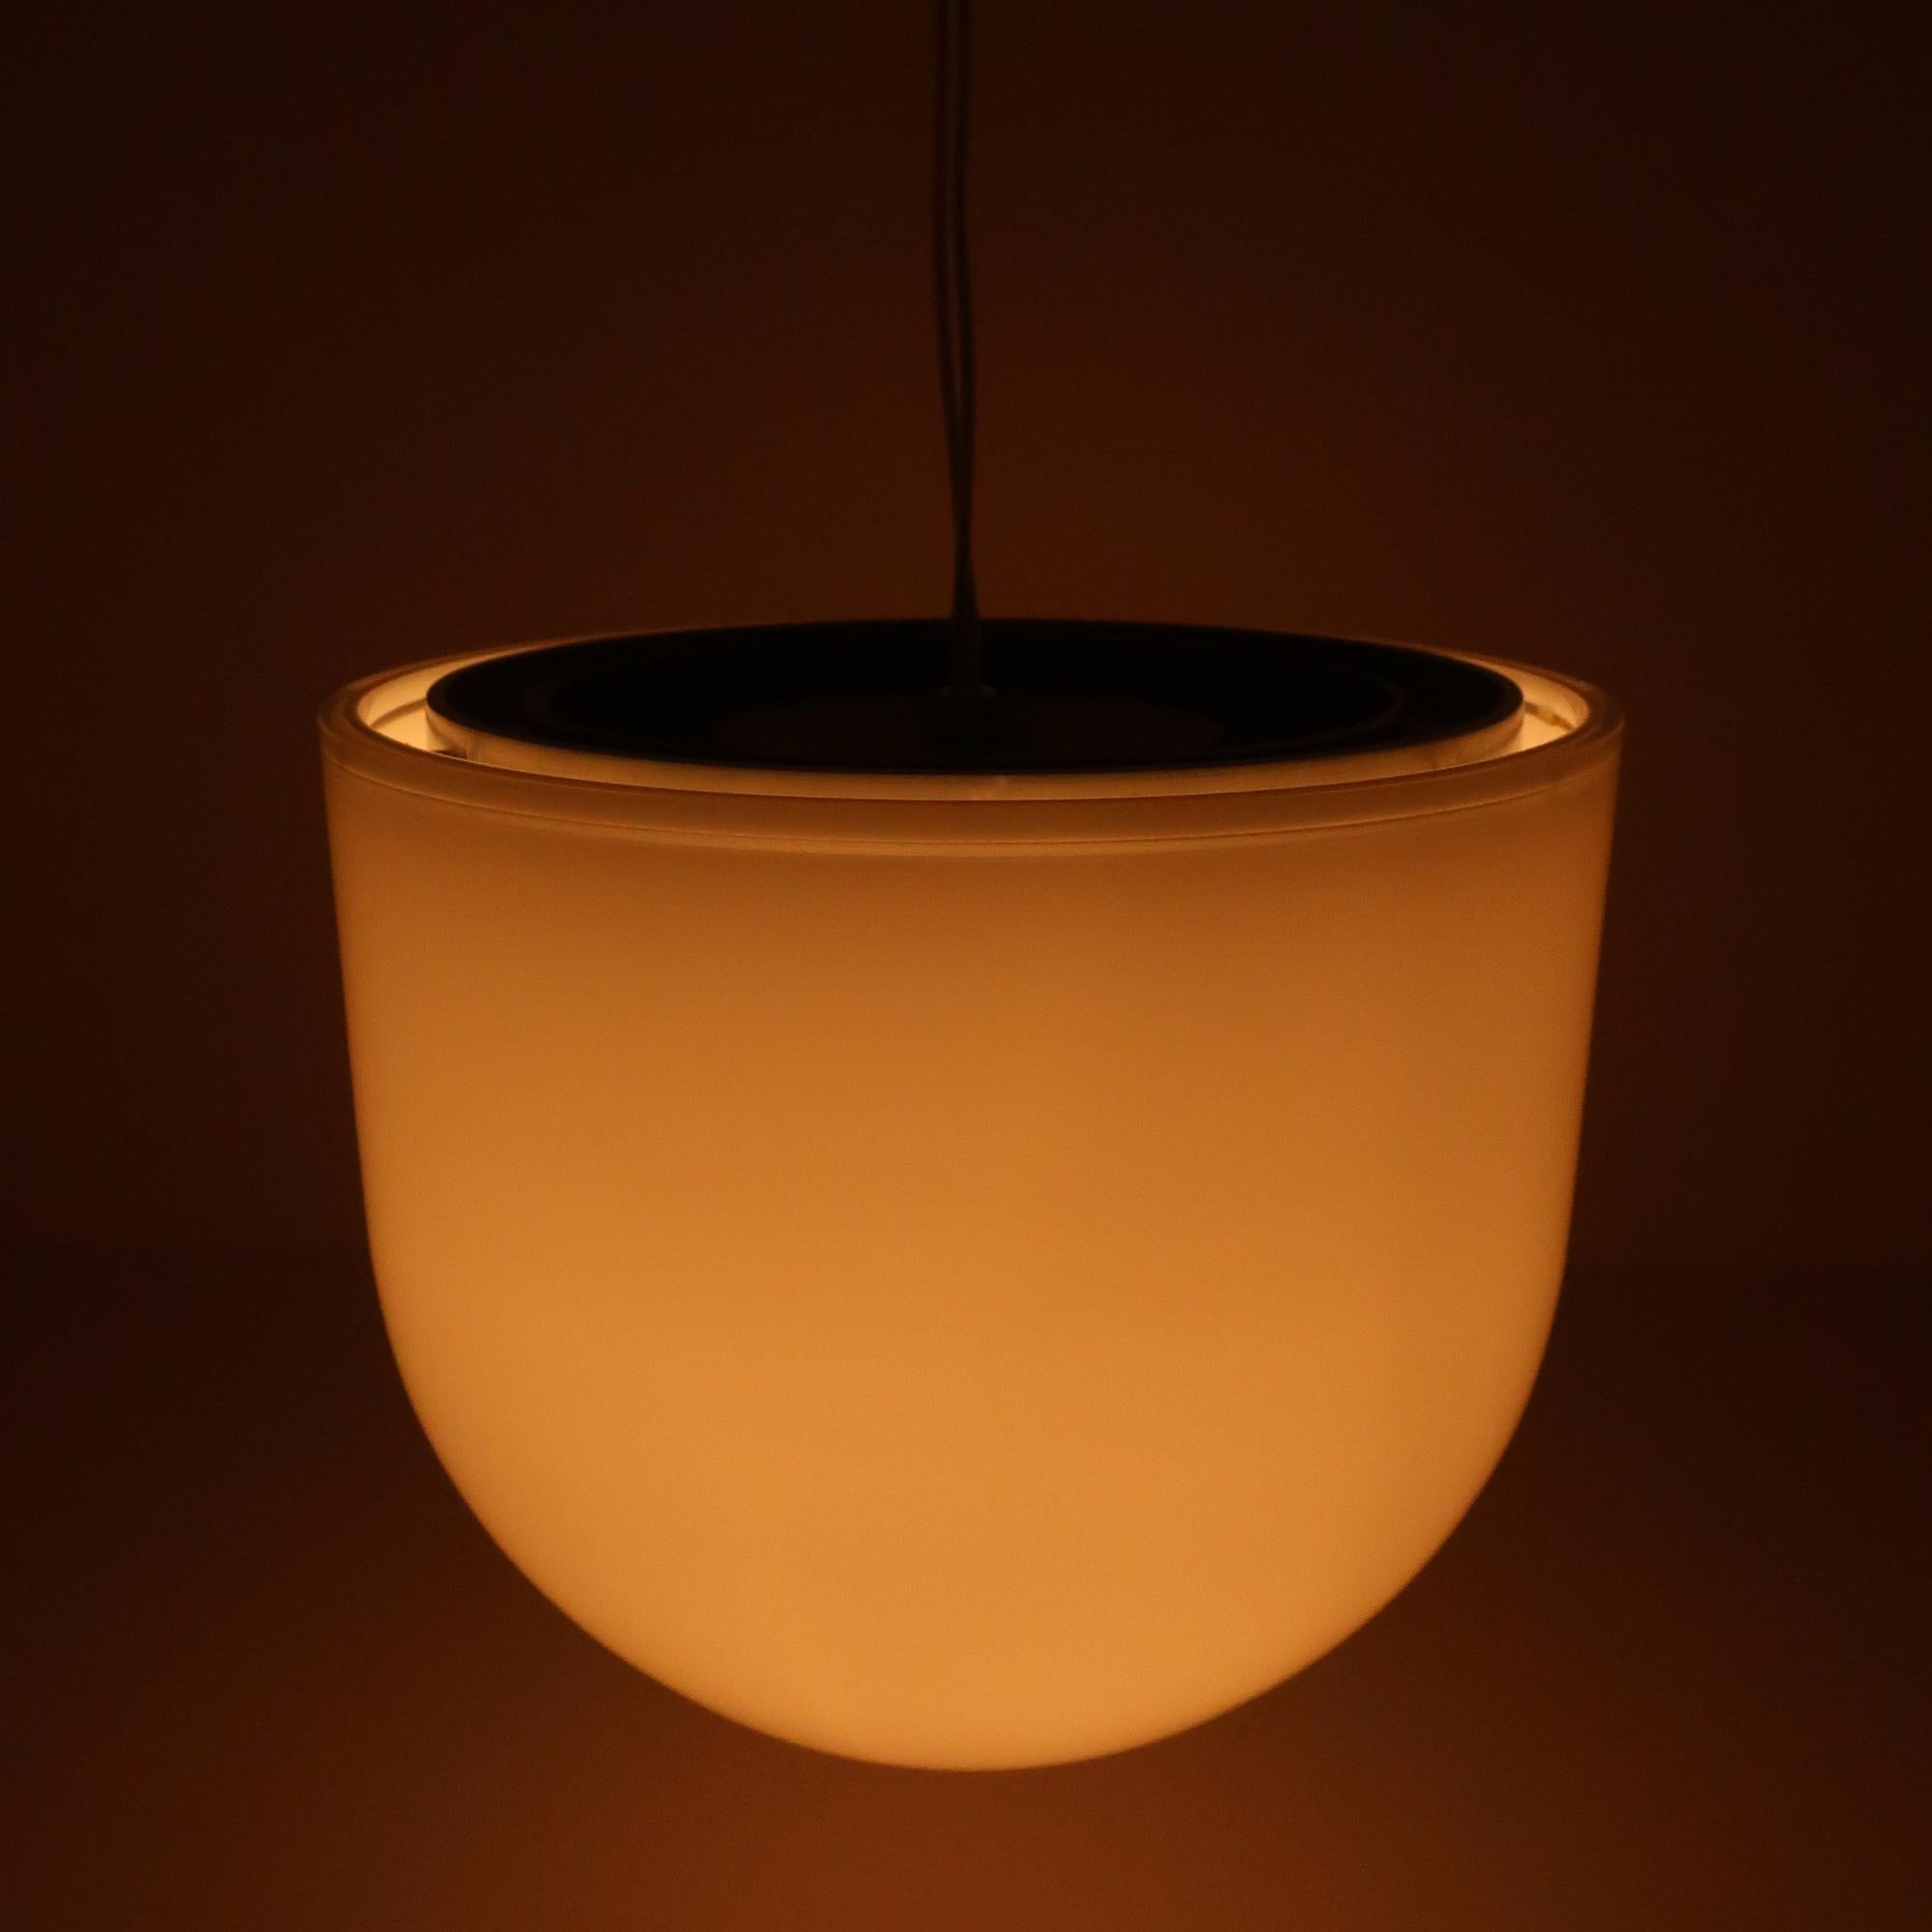 With a handblown white glass globe and simple but concise form, the More ceiling light is designed by Tobias Grau and produced by his eponymous company. In very good condition with very light wear.

7.5